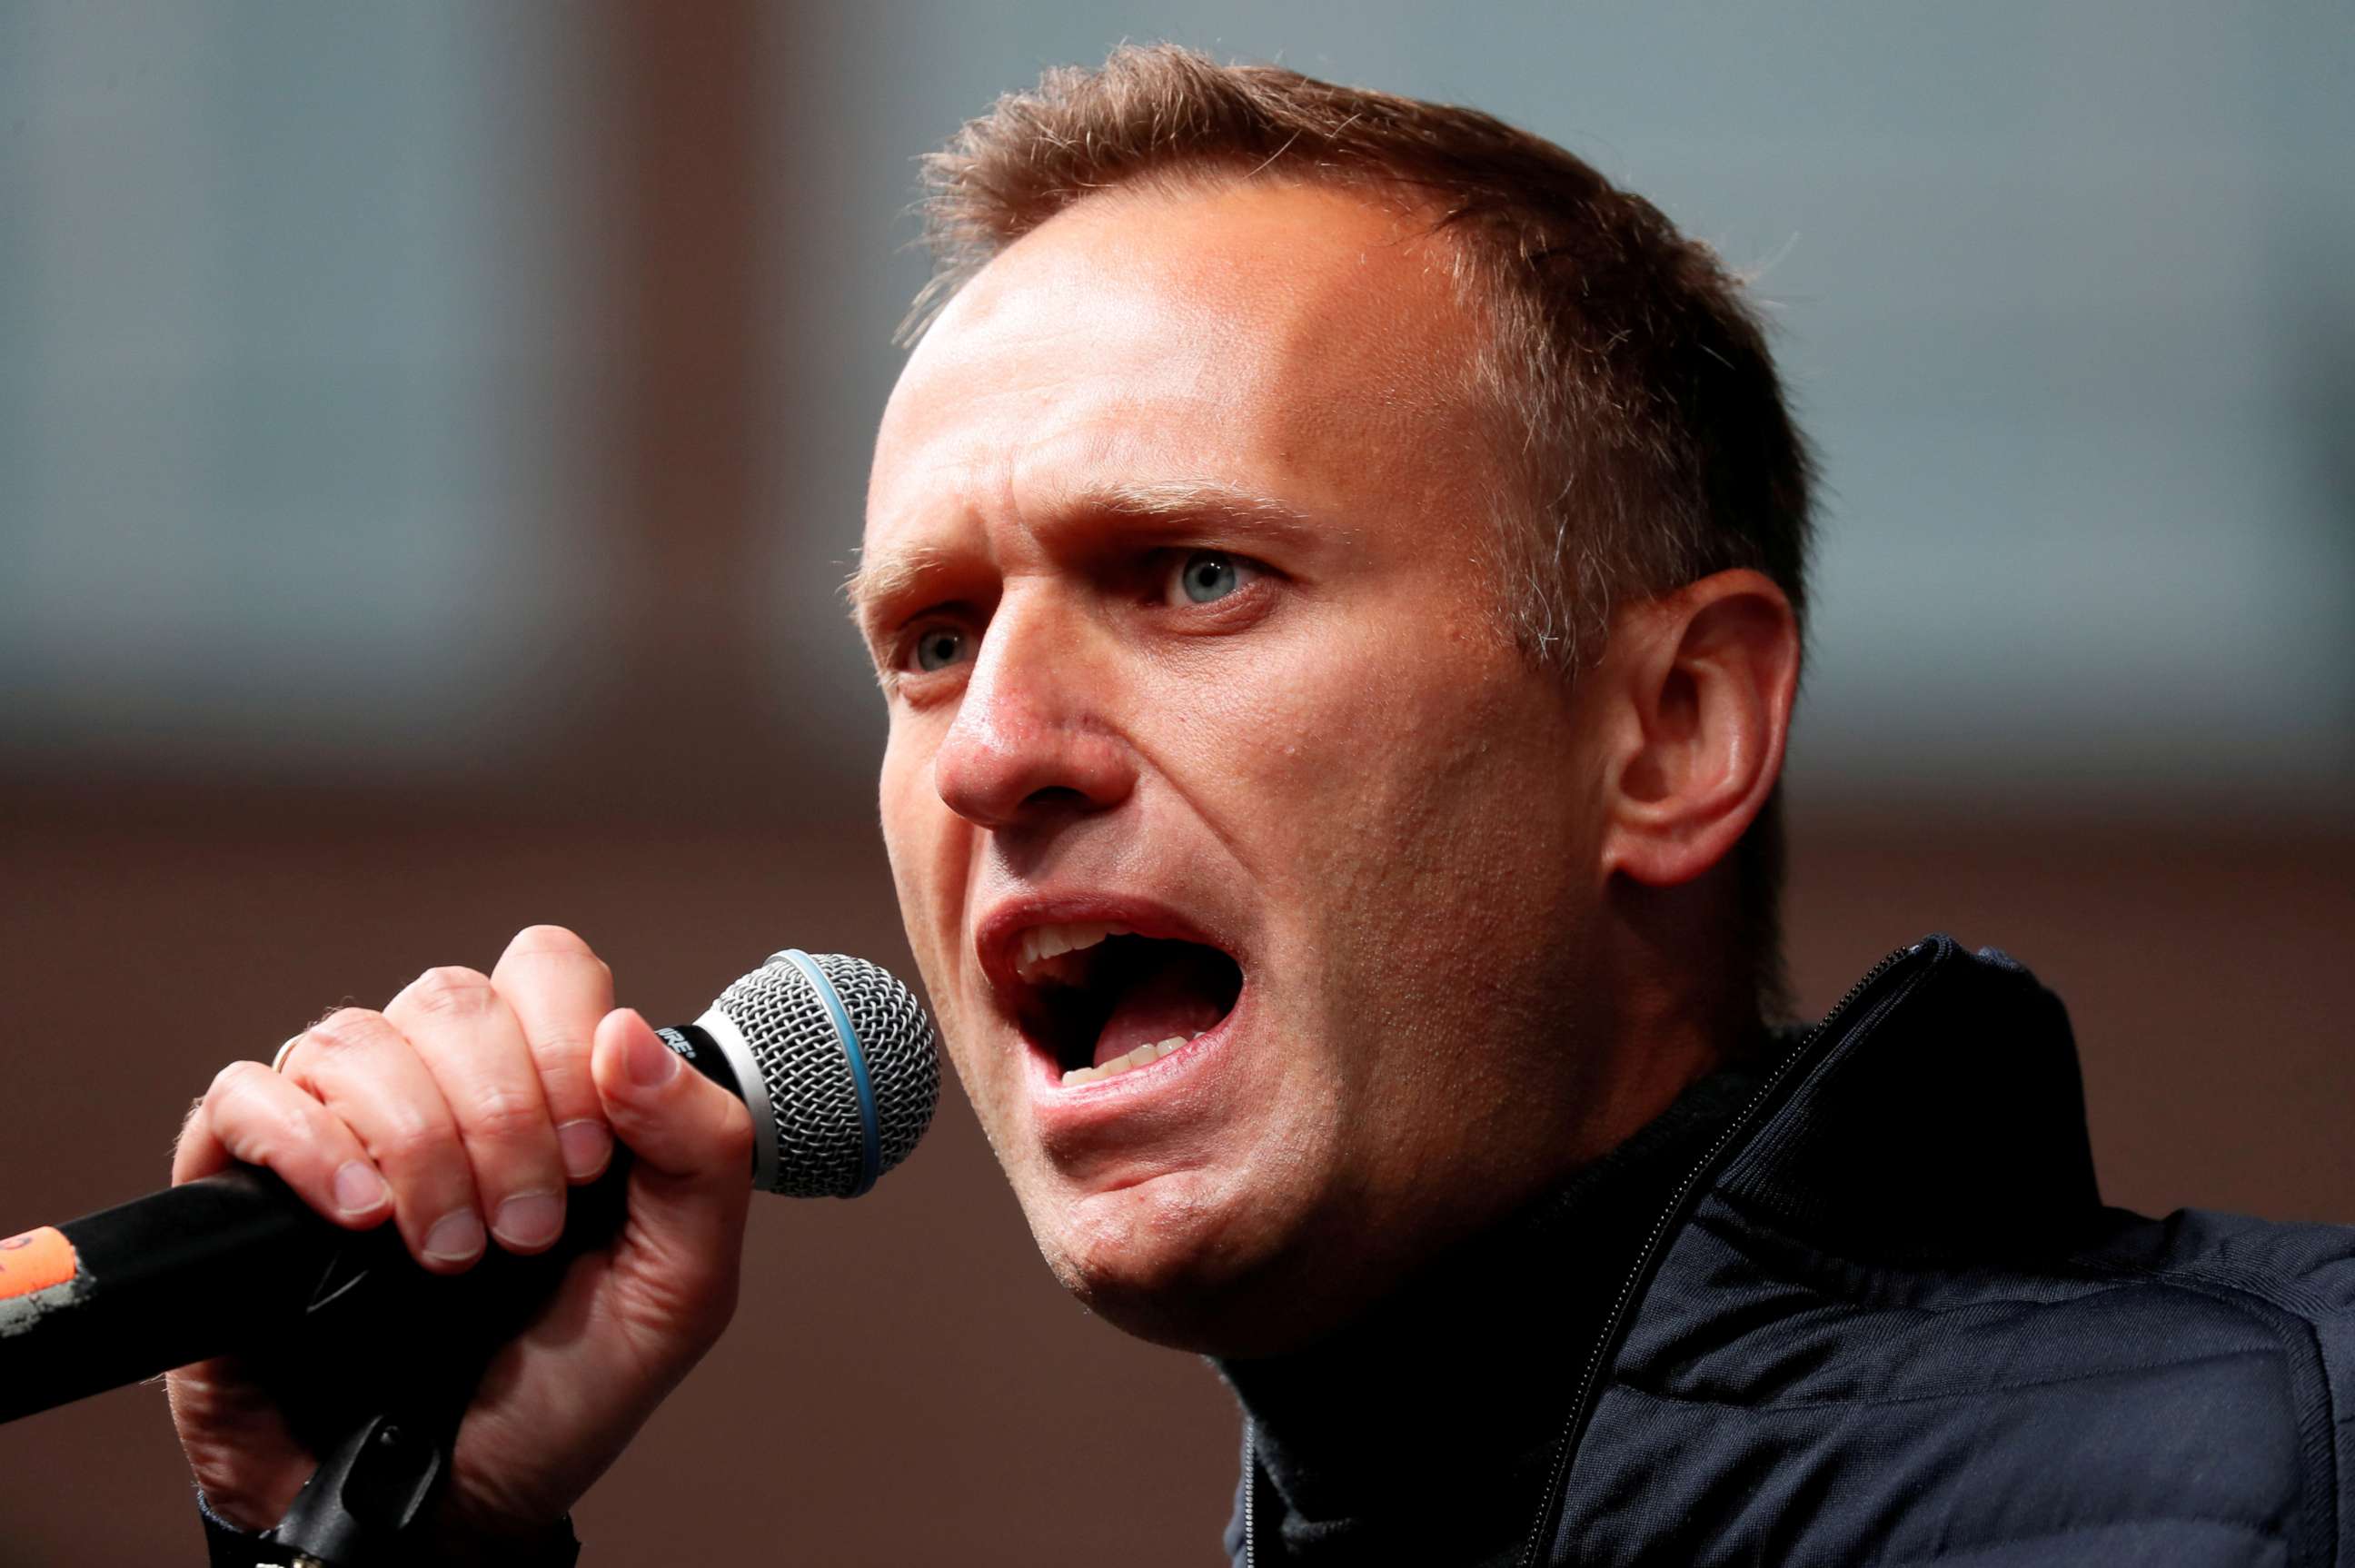 FILE PHOTO: Russian opposition leader Alexei Navalny delivers a speech during a rally to demand the release of jailed protesters, who were detained during opposition demonstrations for fair elections, in Moscow, Russia September 29, 2019.